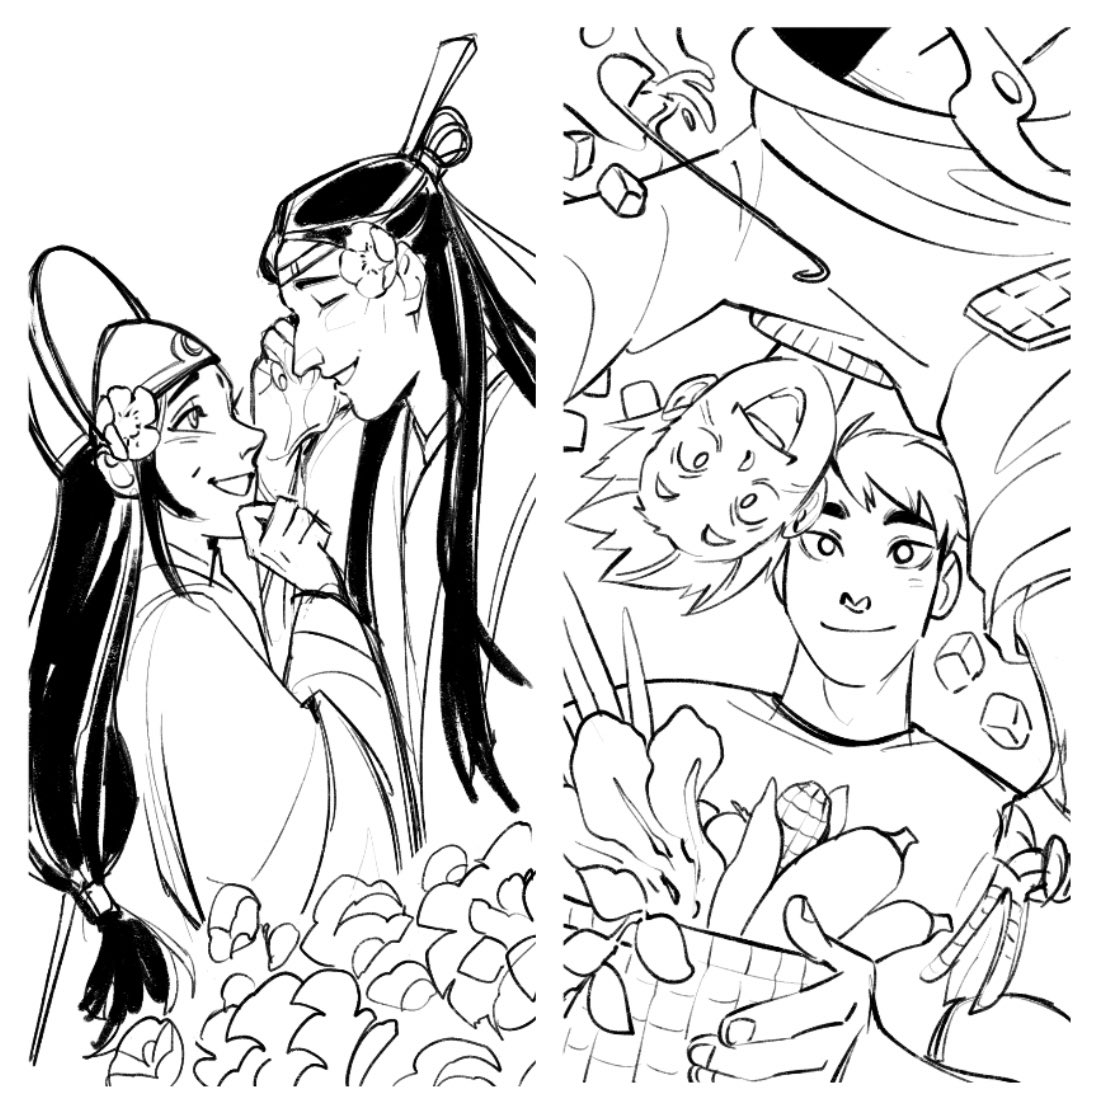 zzzzzzz i have to colour these but do i have the strength 